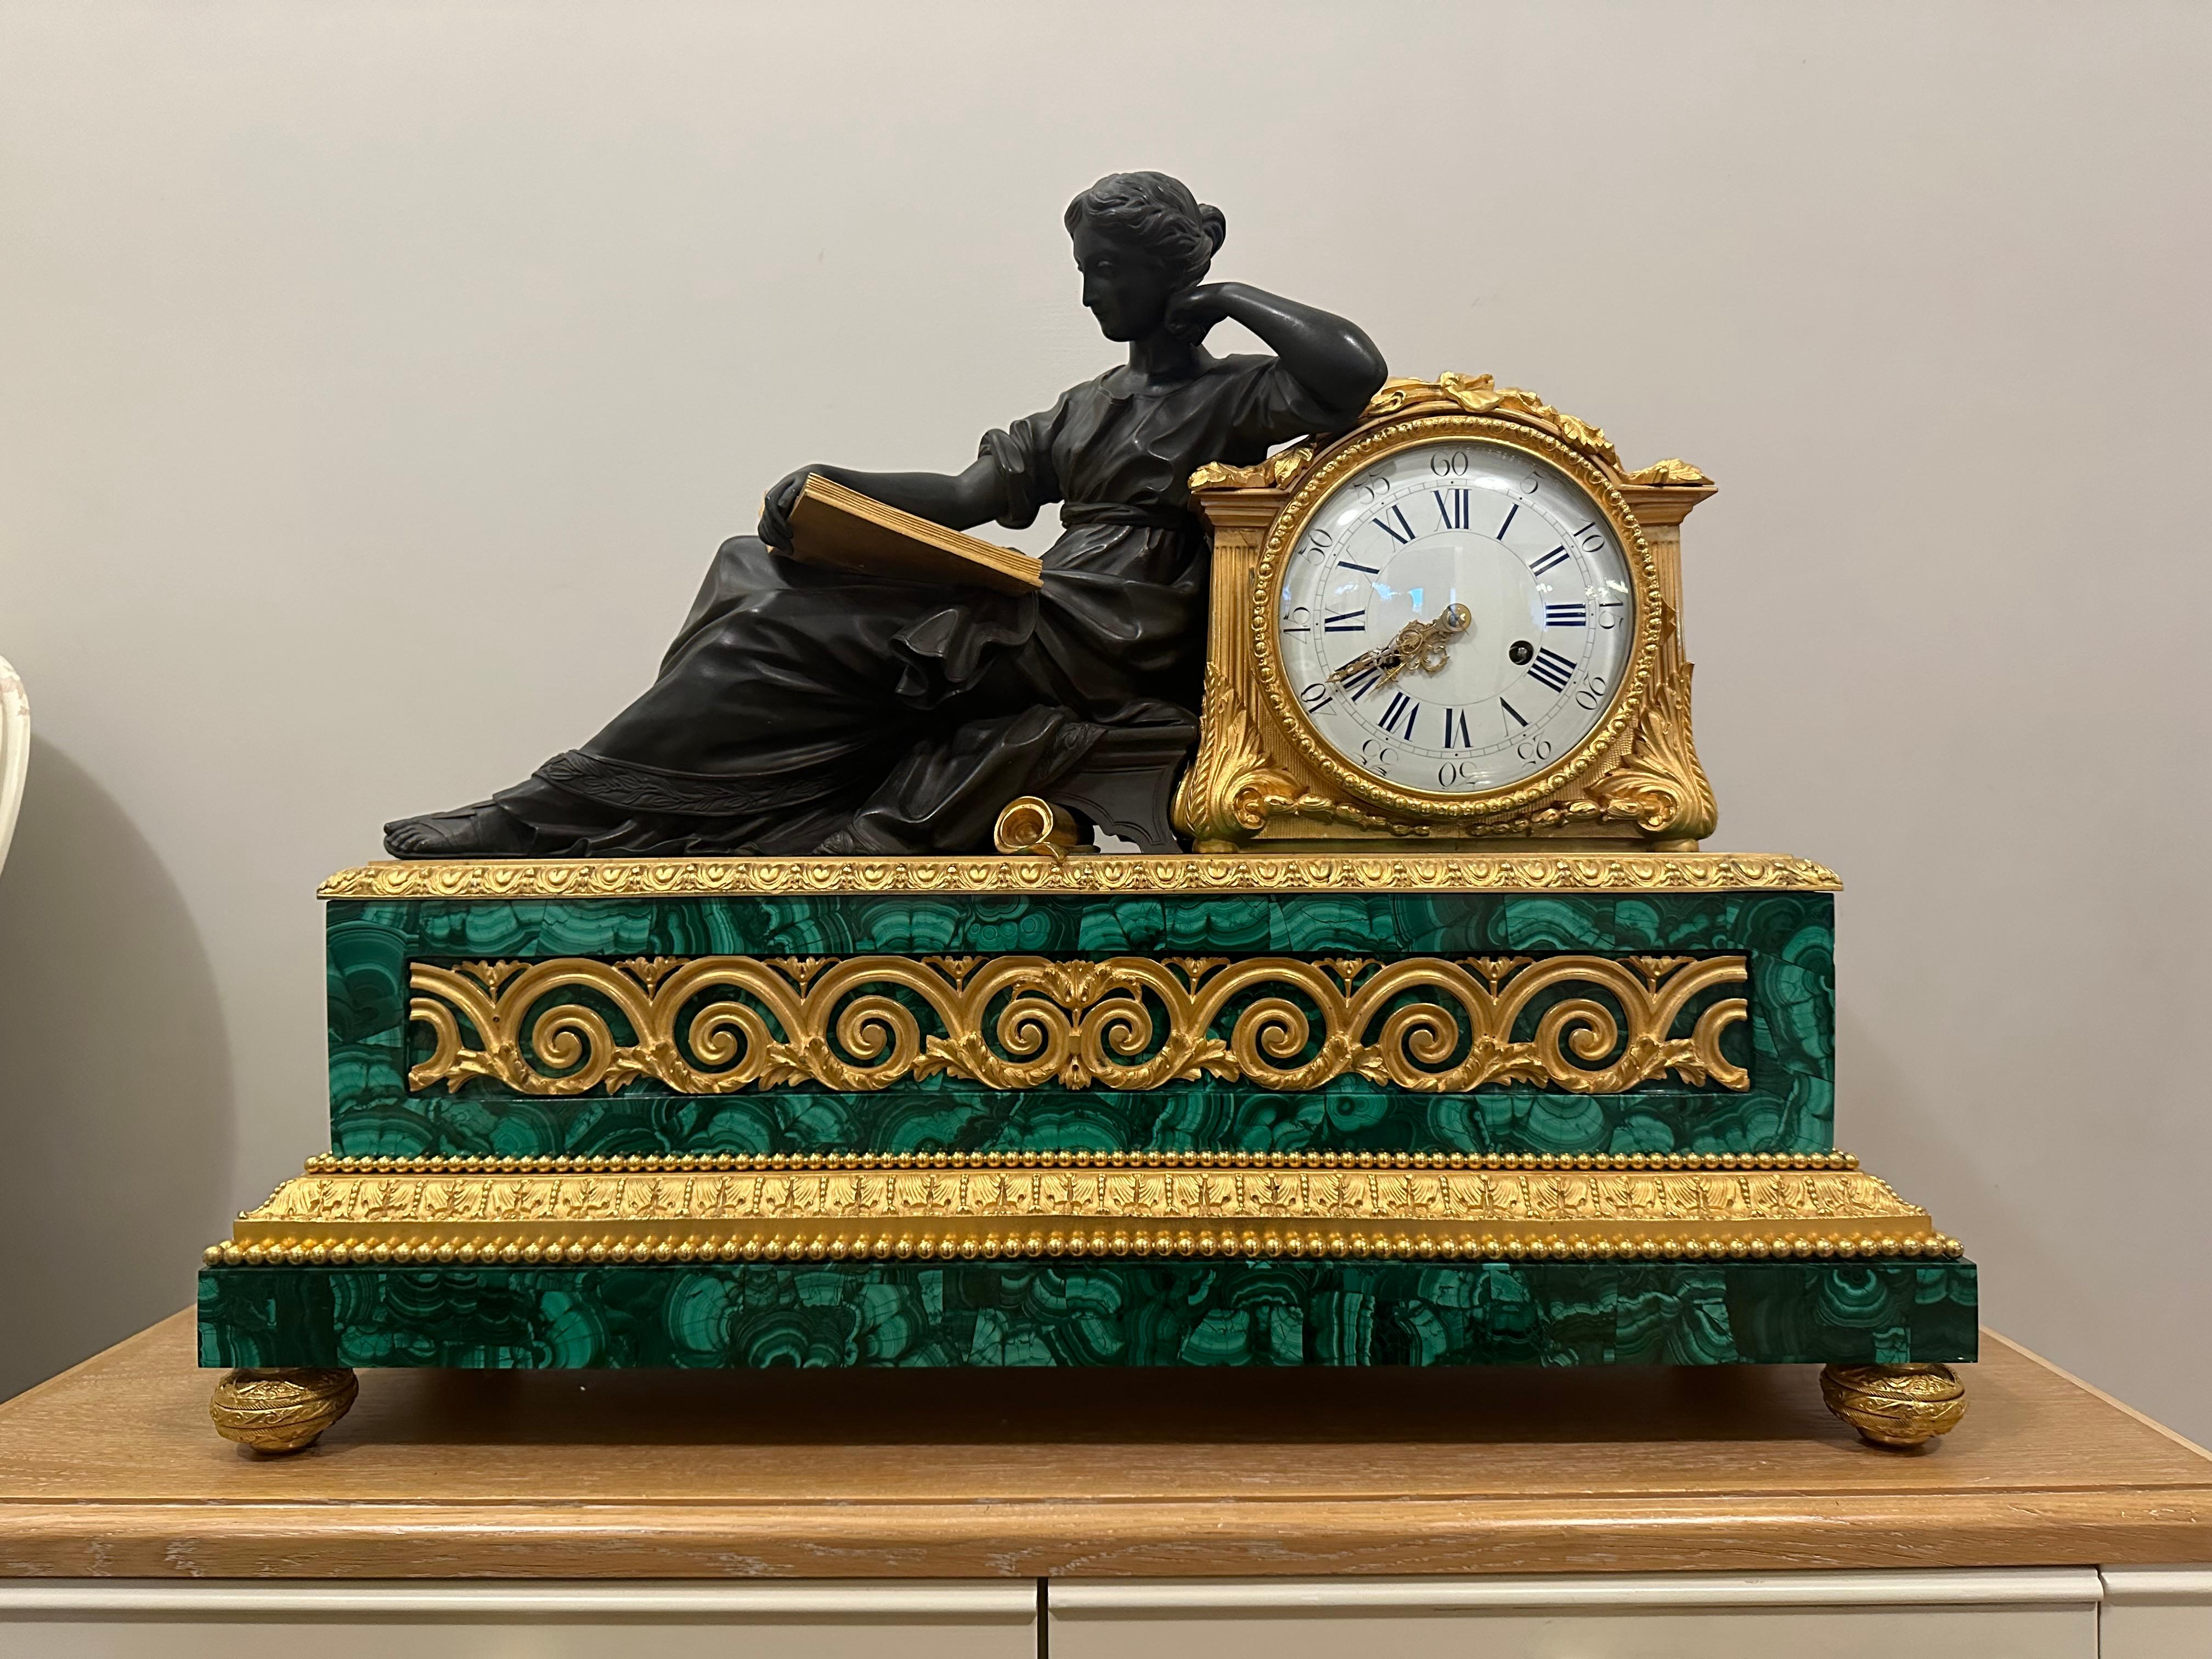 Napoleon III “Pendule à la Geoffrin” . A gilded figure representing “The Use of Time” reclines against the clock while reading. The first version of this model was made as early as 1757 for Madame Geoffrin, who had a famous literary salon in Paris